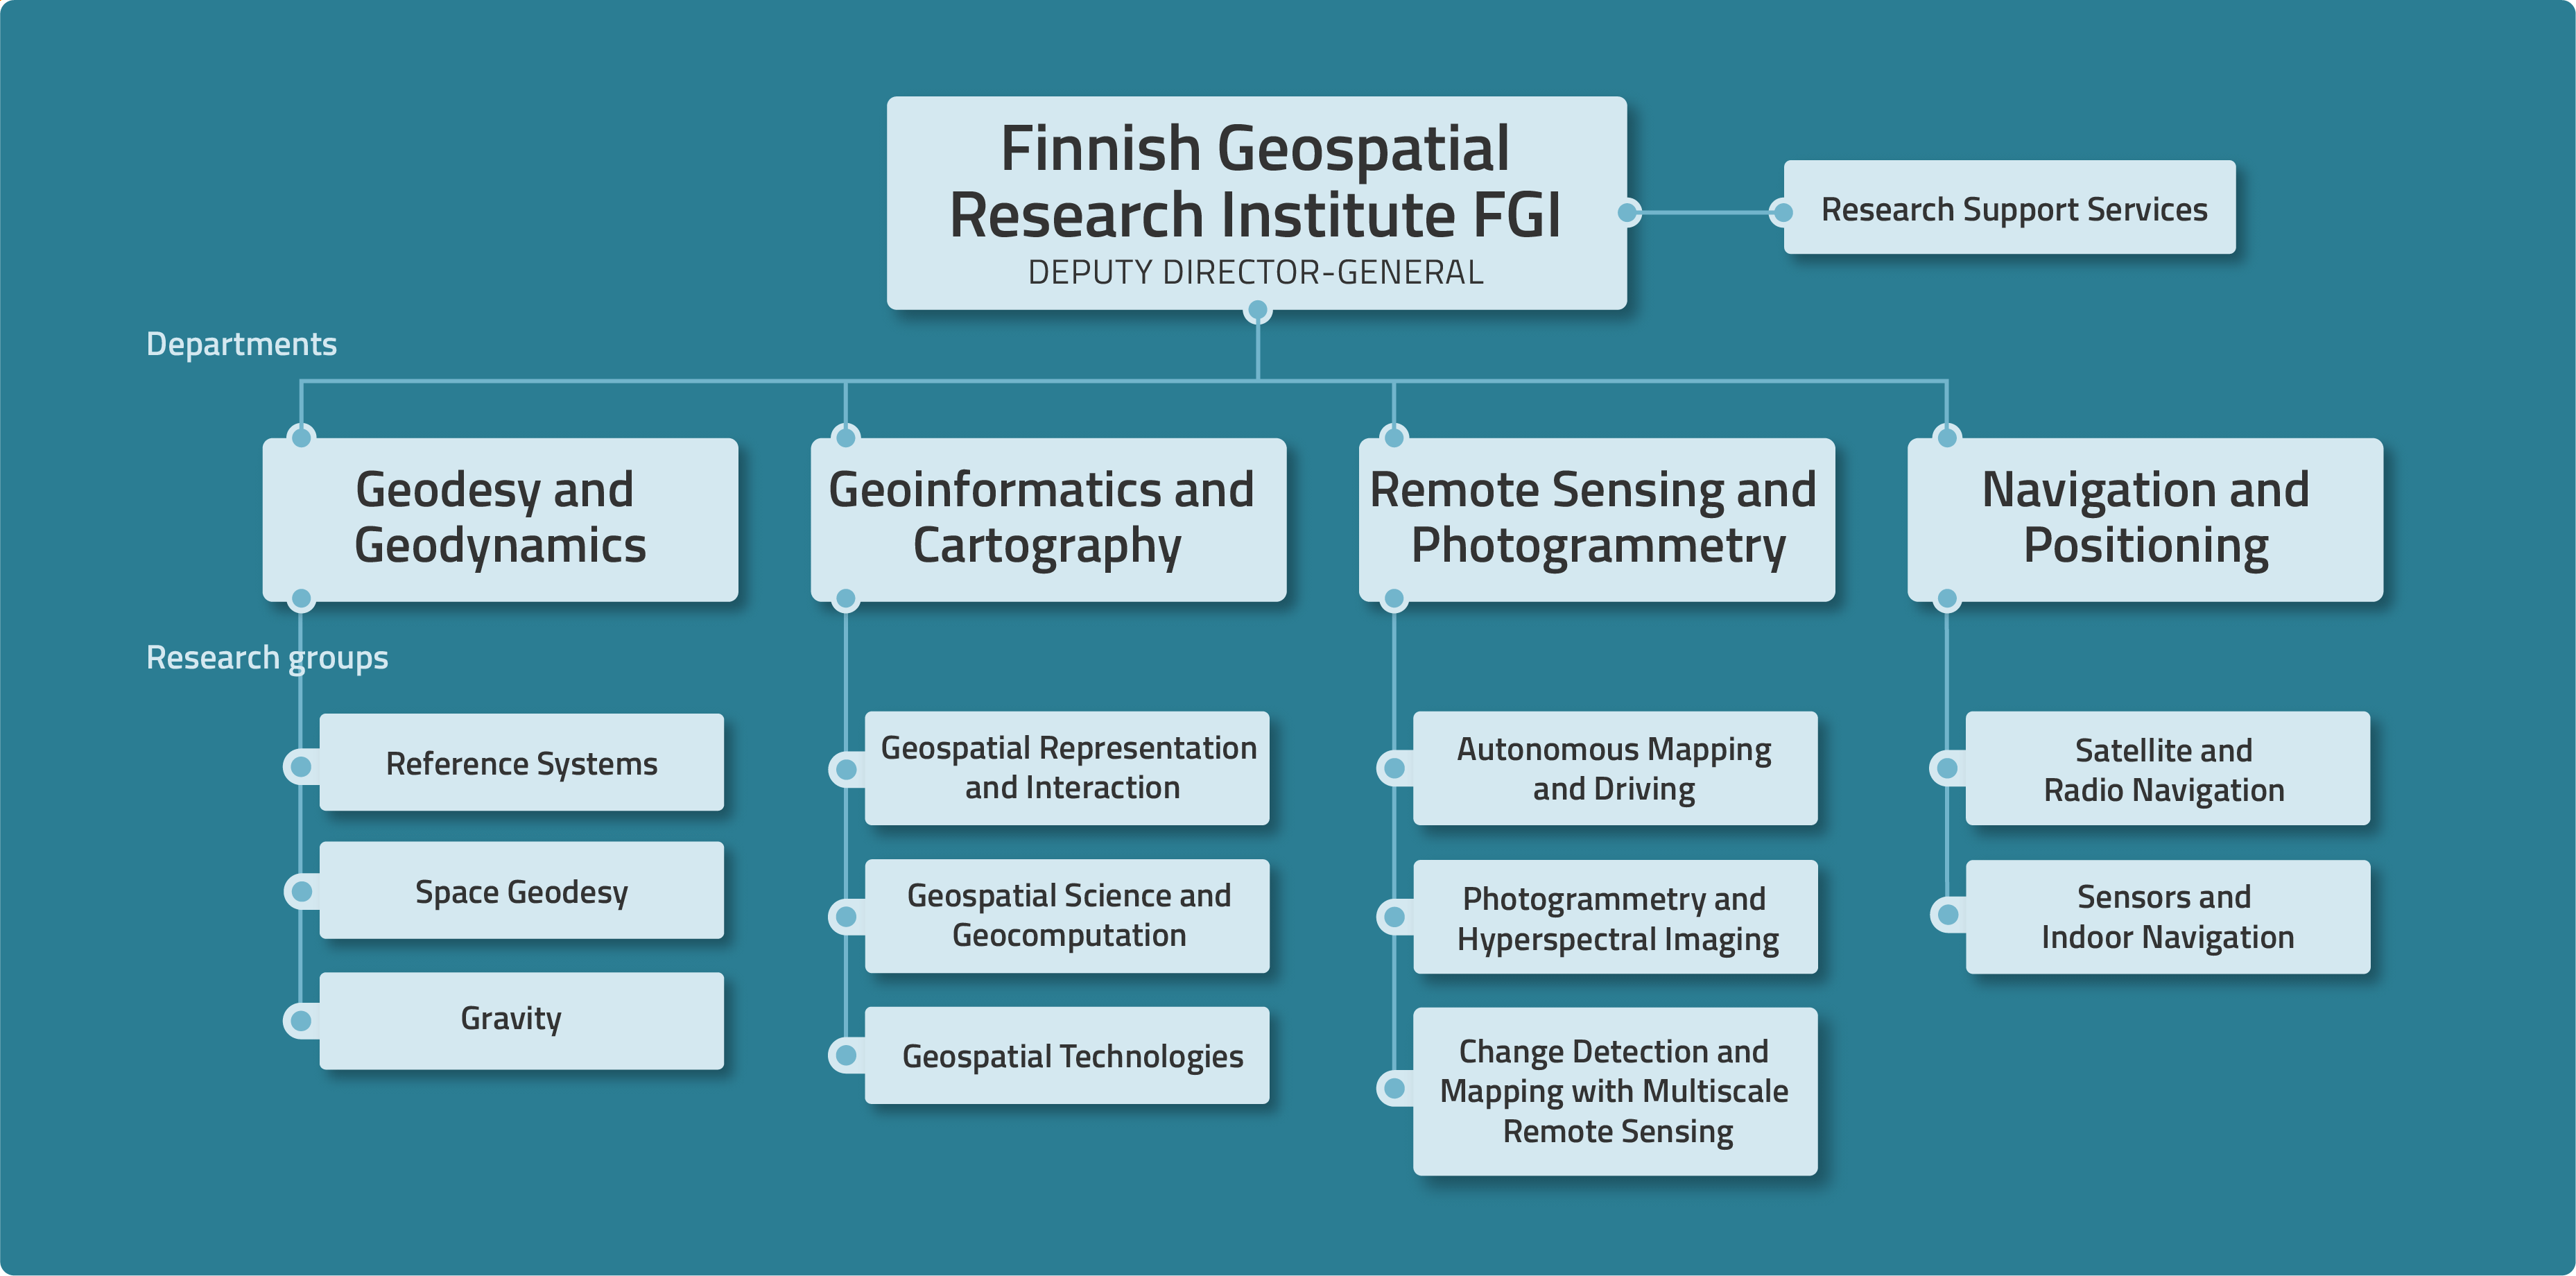 The FGI's departments and their research groups.